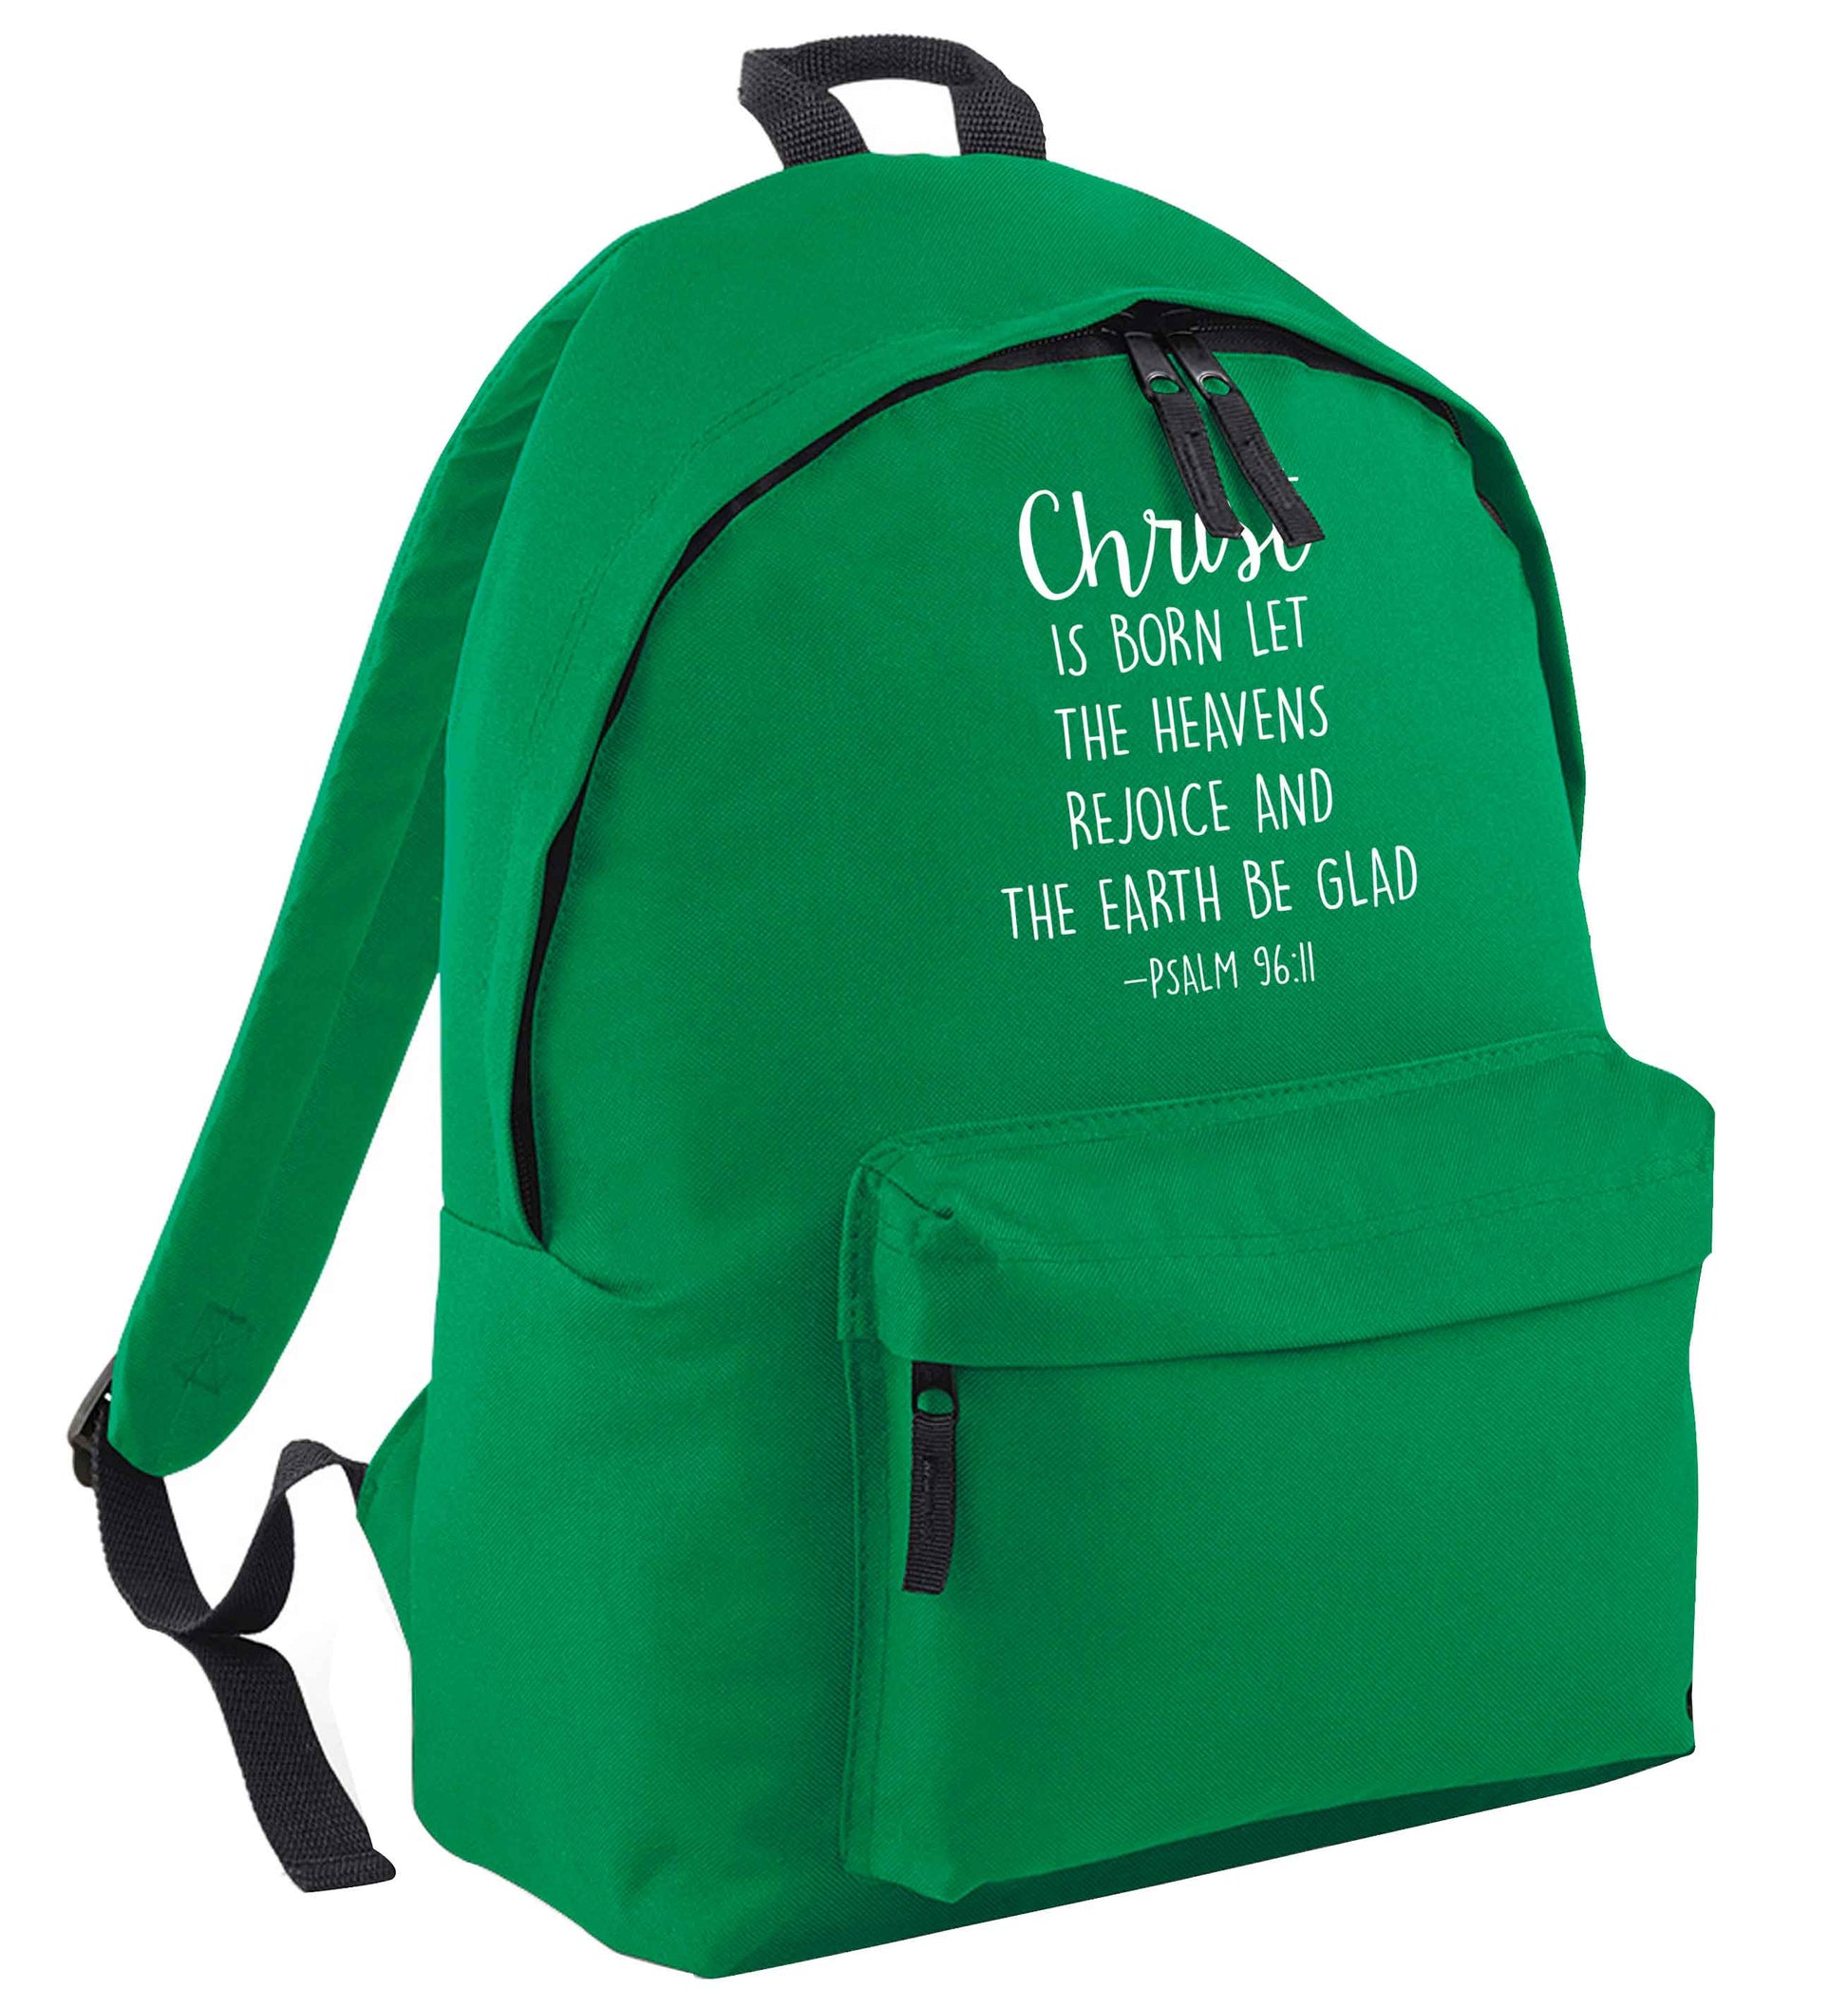 Christ is Born Psalm 96:11 green adults backpack